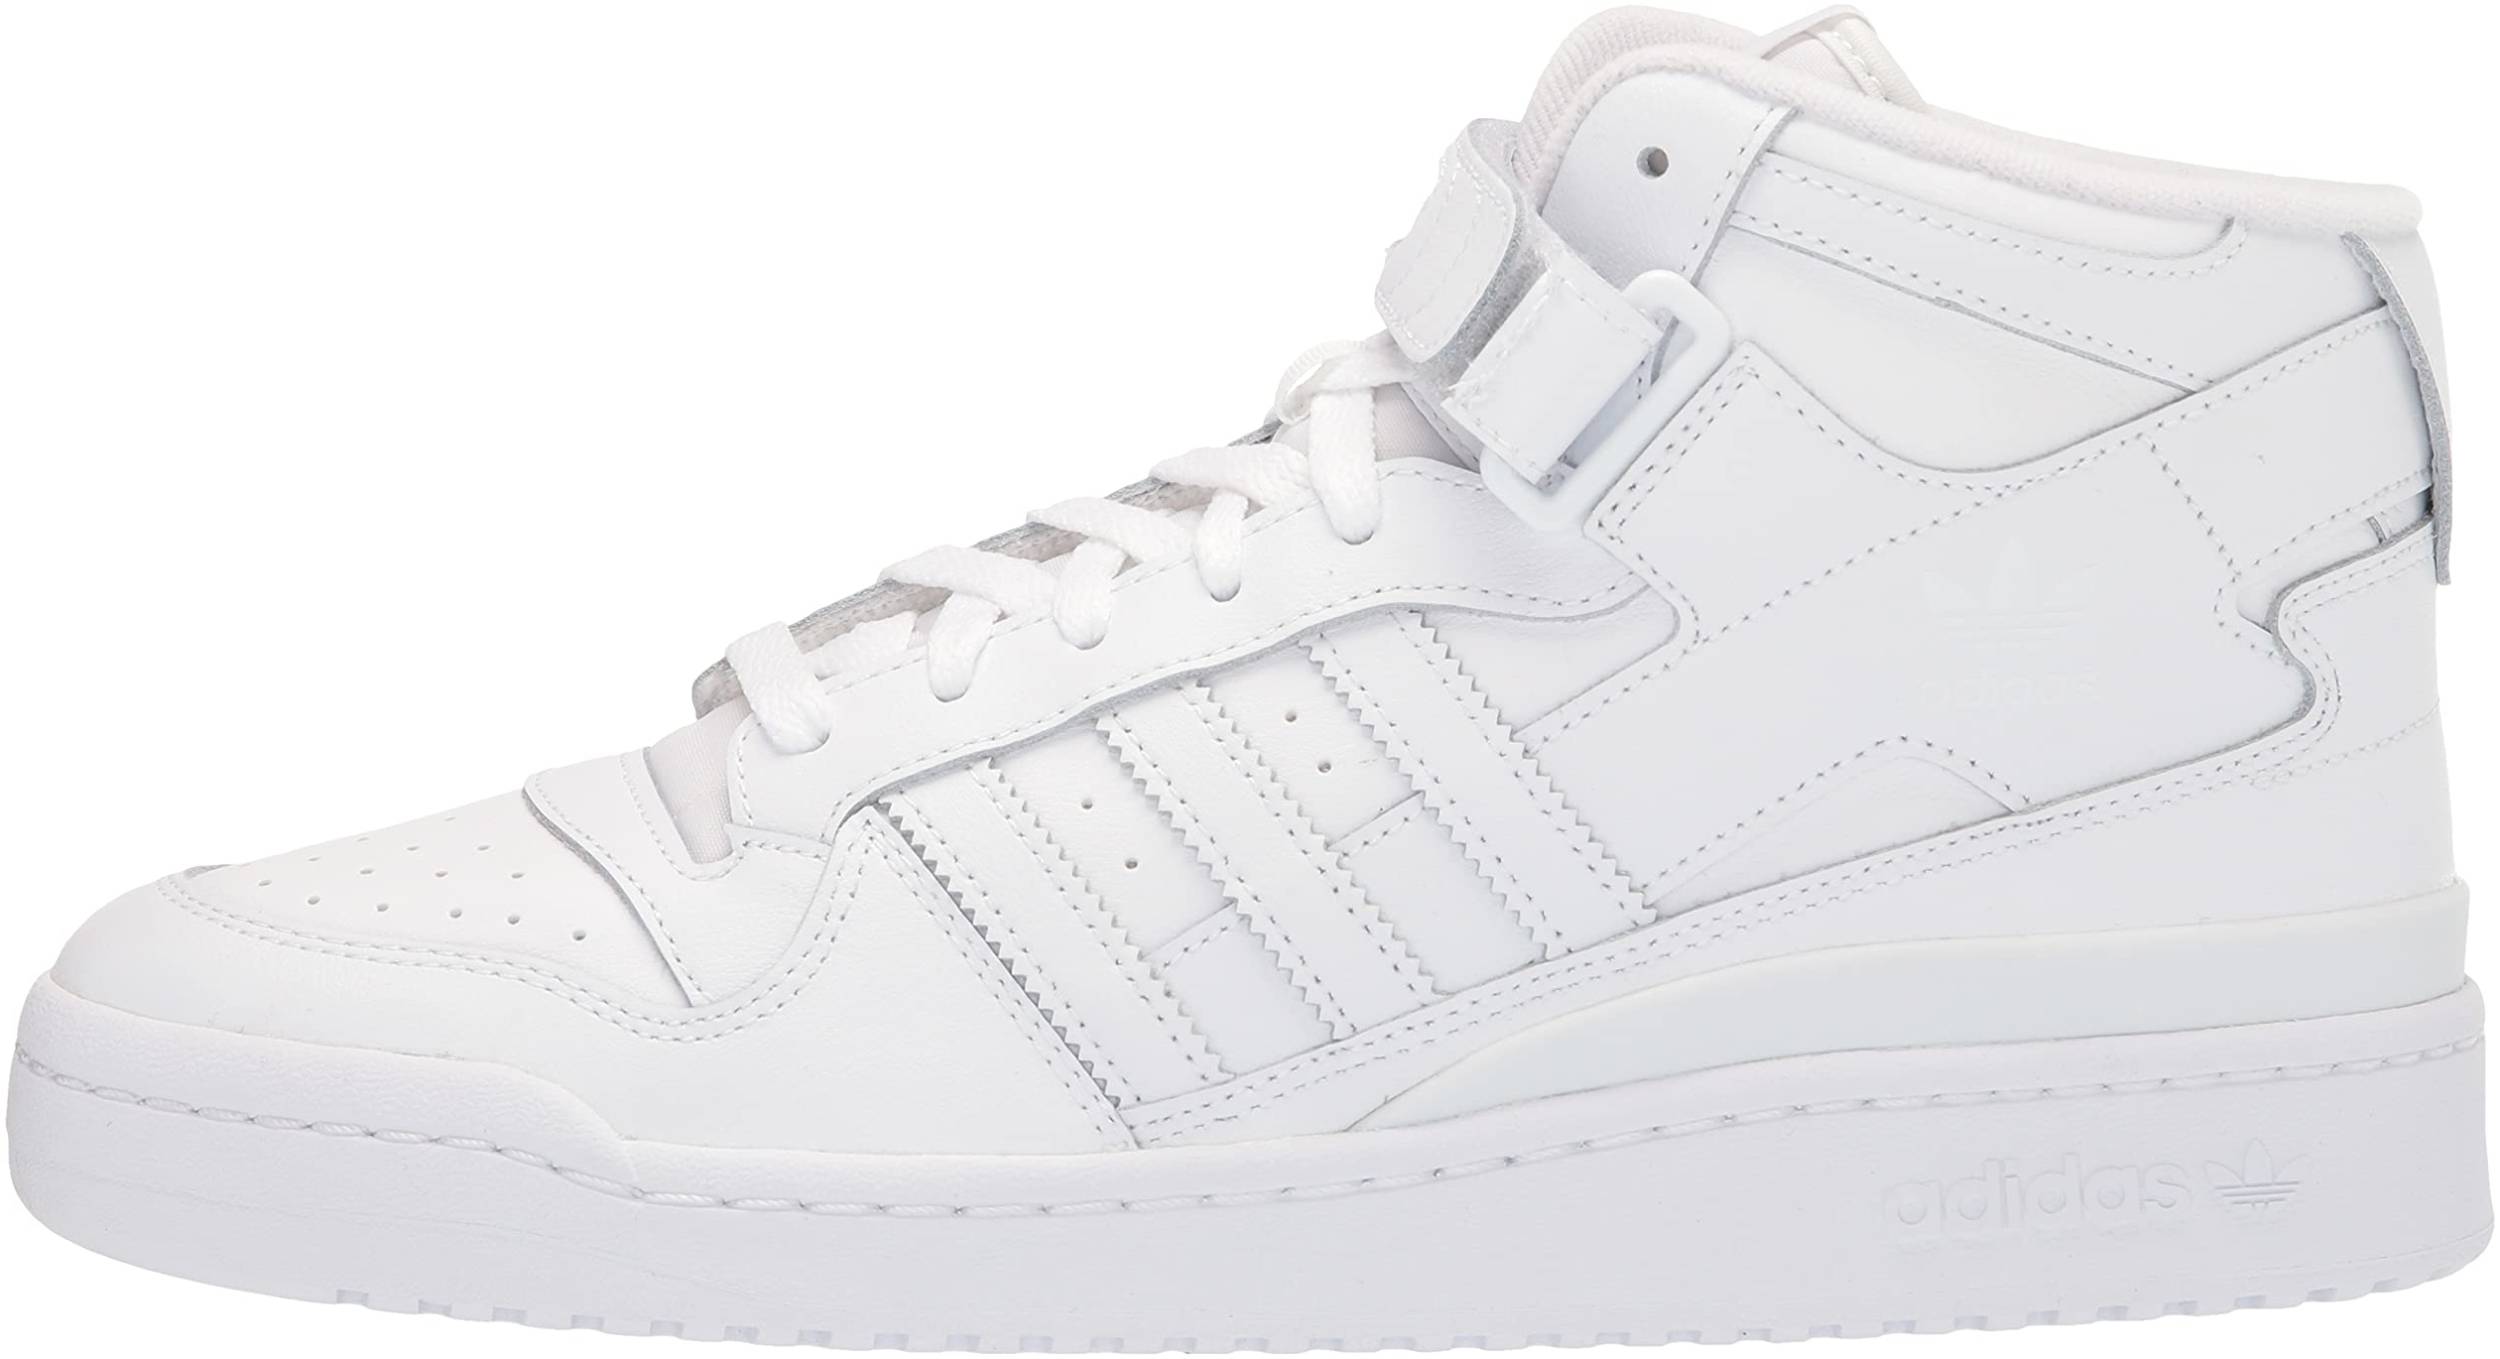 Adidas Forum Mid sneakers in 4 colors (only $77) | RunRepeat